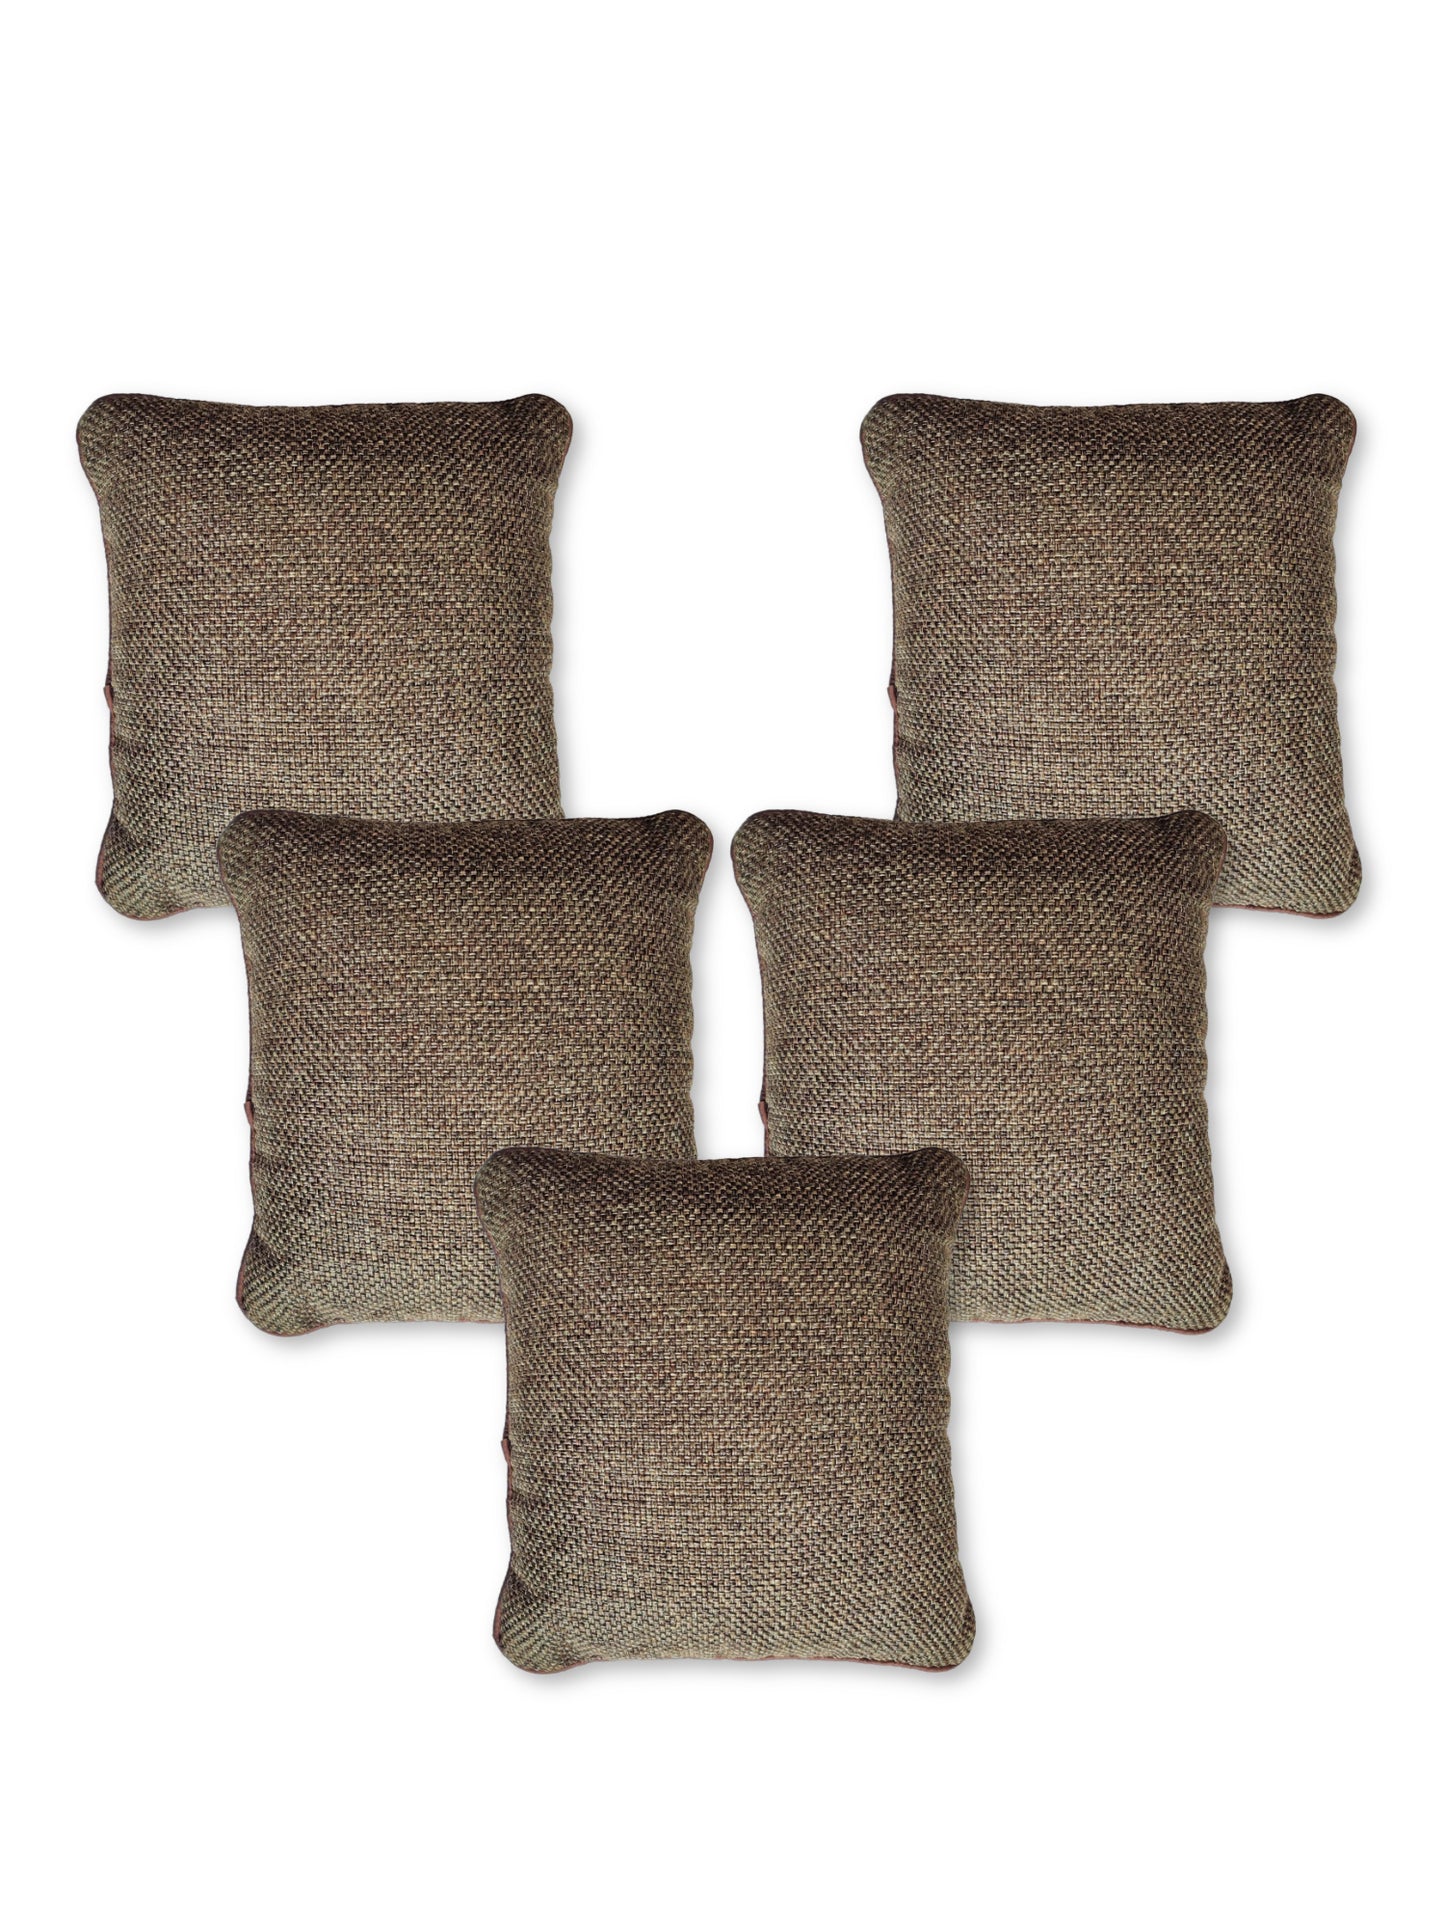 Natural Jute Beauty: Pack of 5 Exquisite Cushion Covers for Rustic Charm, 12 X 12 Inches, Brown